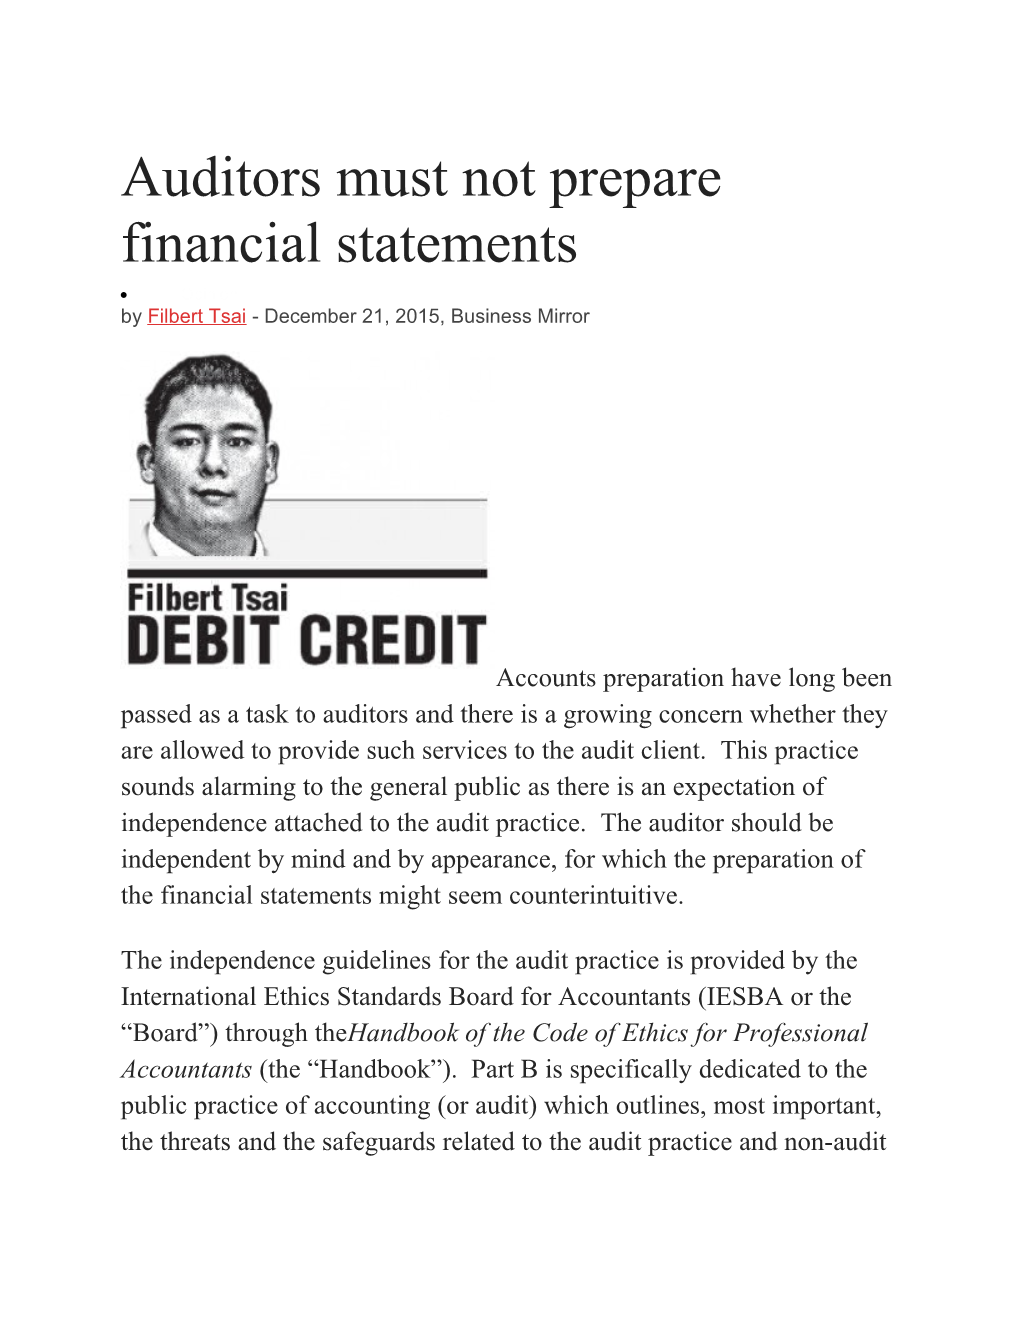 Auditors Must Not Prepare Financial Statements